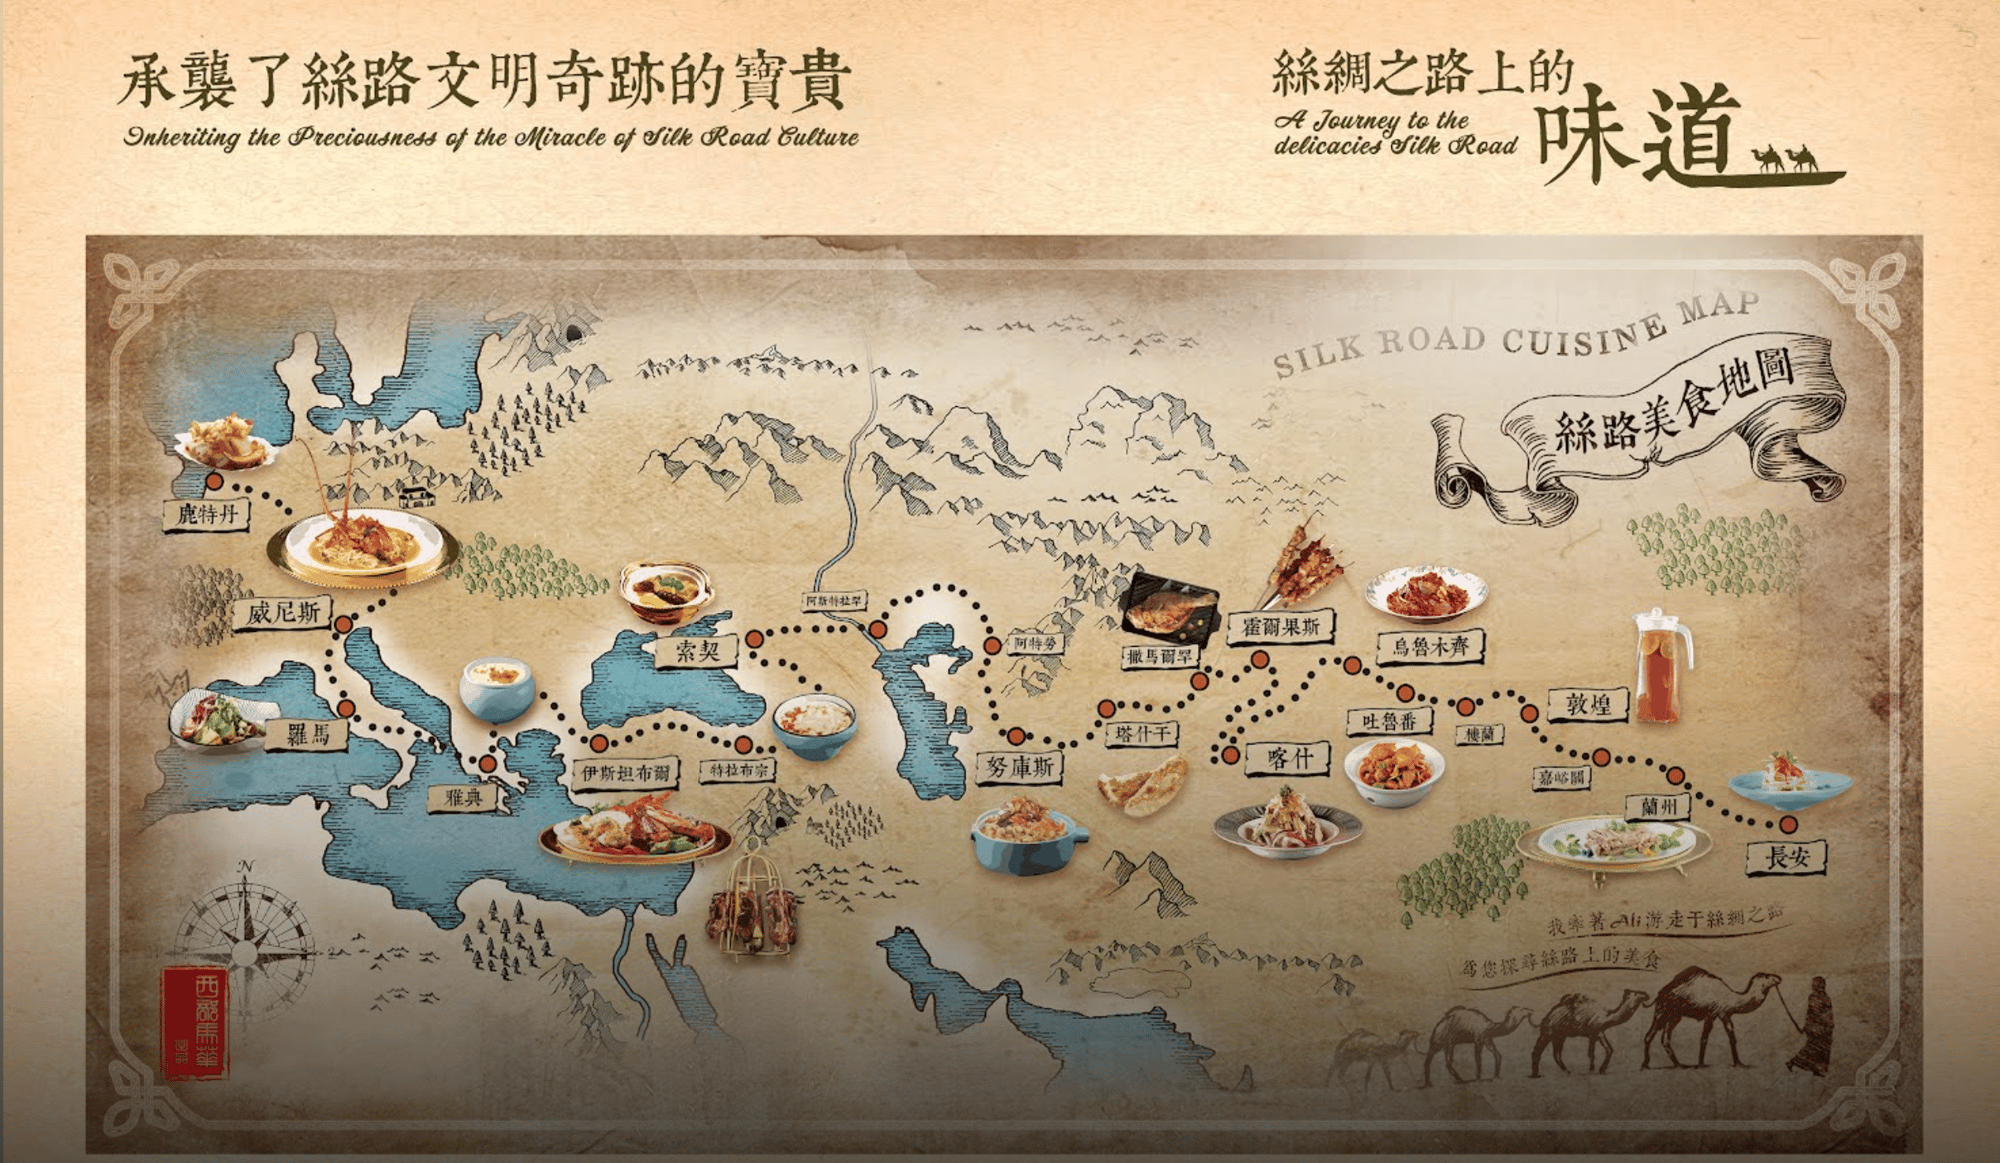 A Journey to the Delicacies of Silk Road